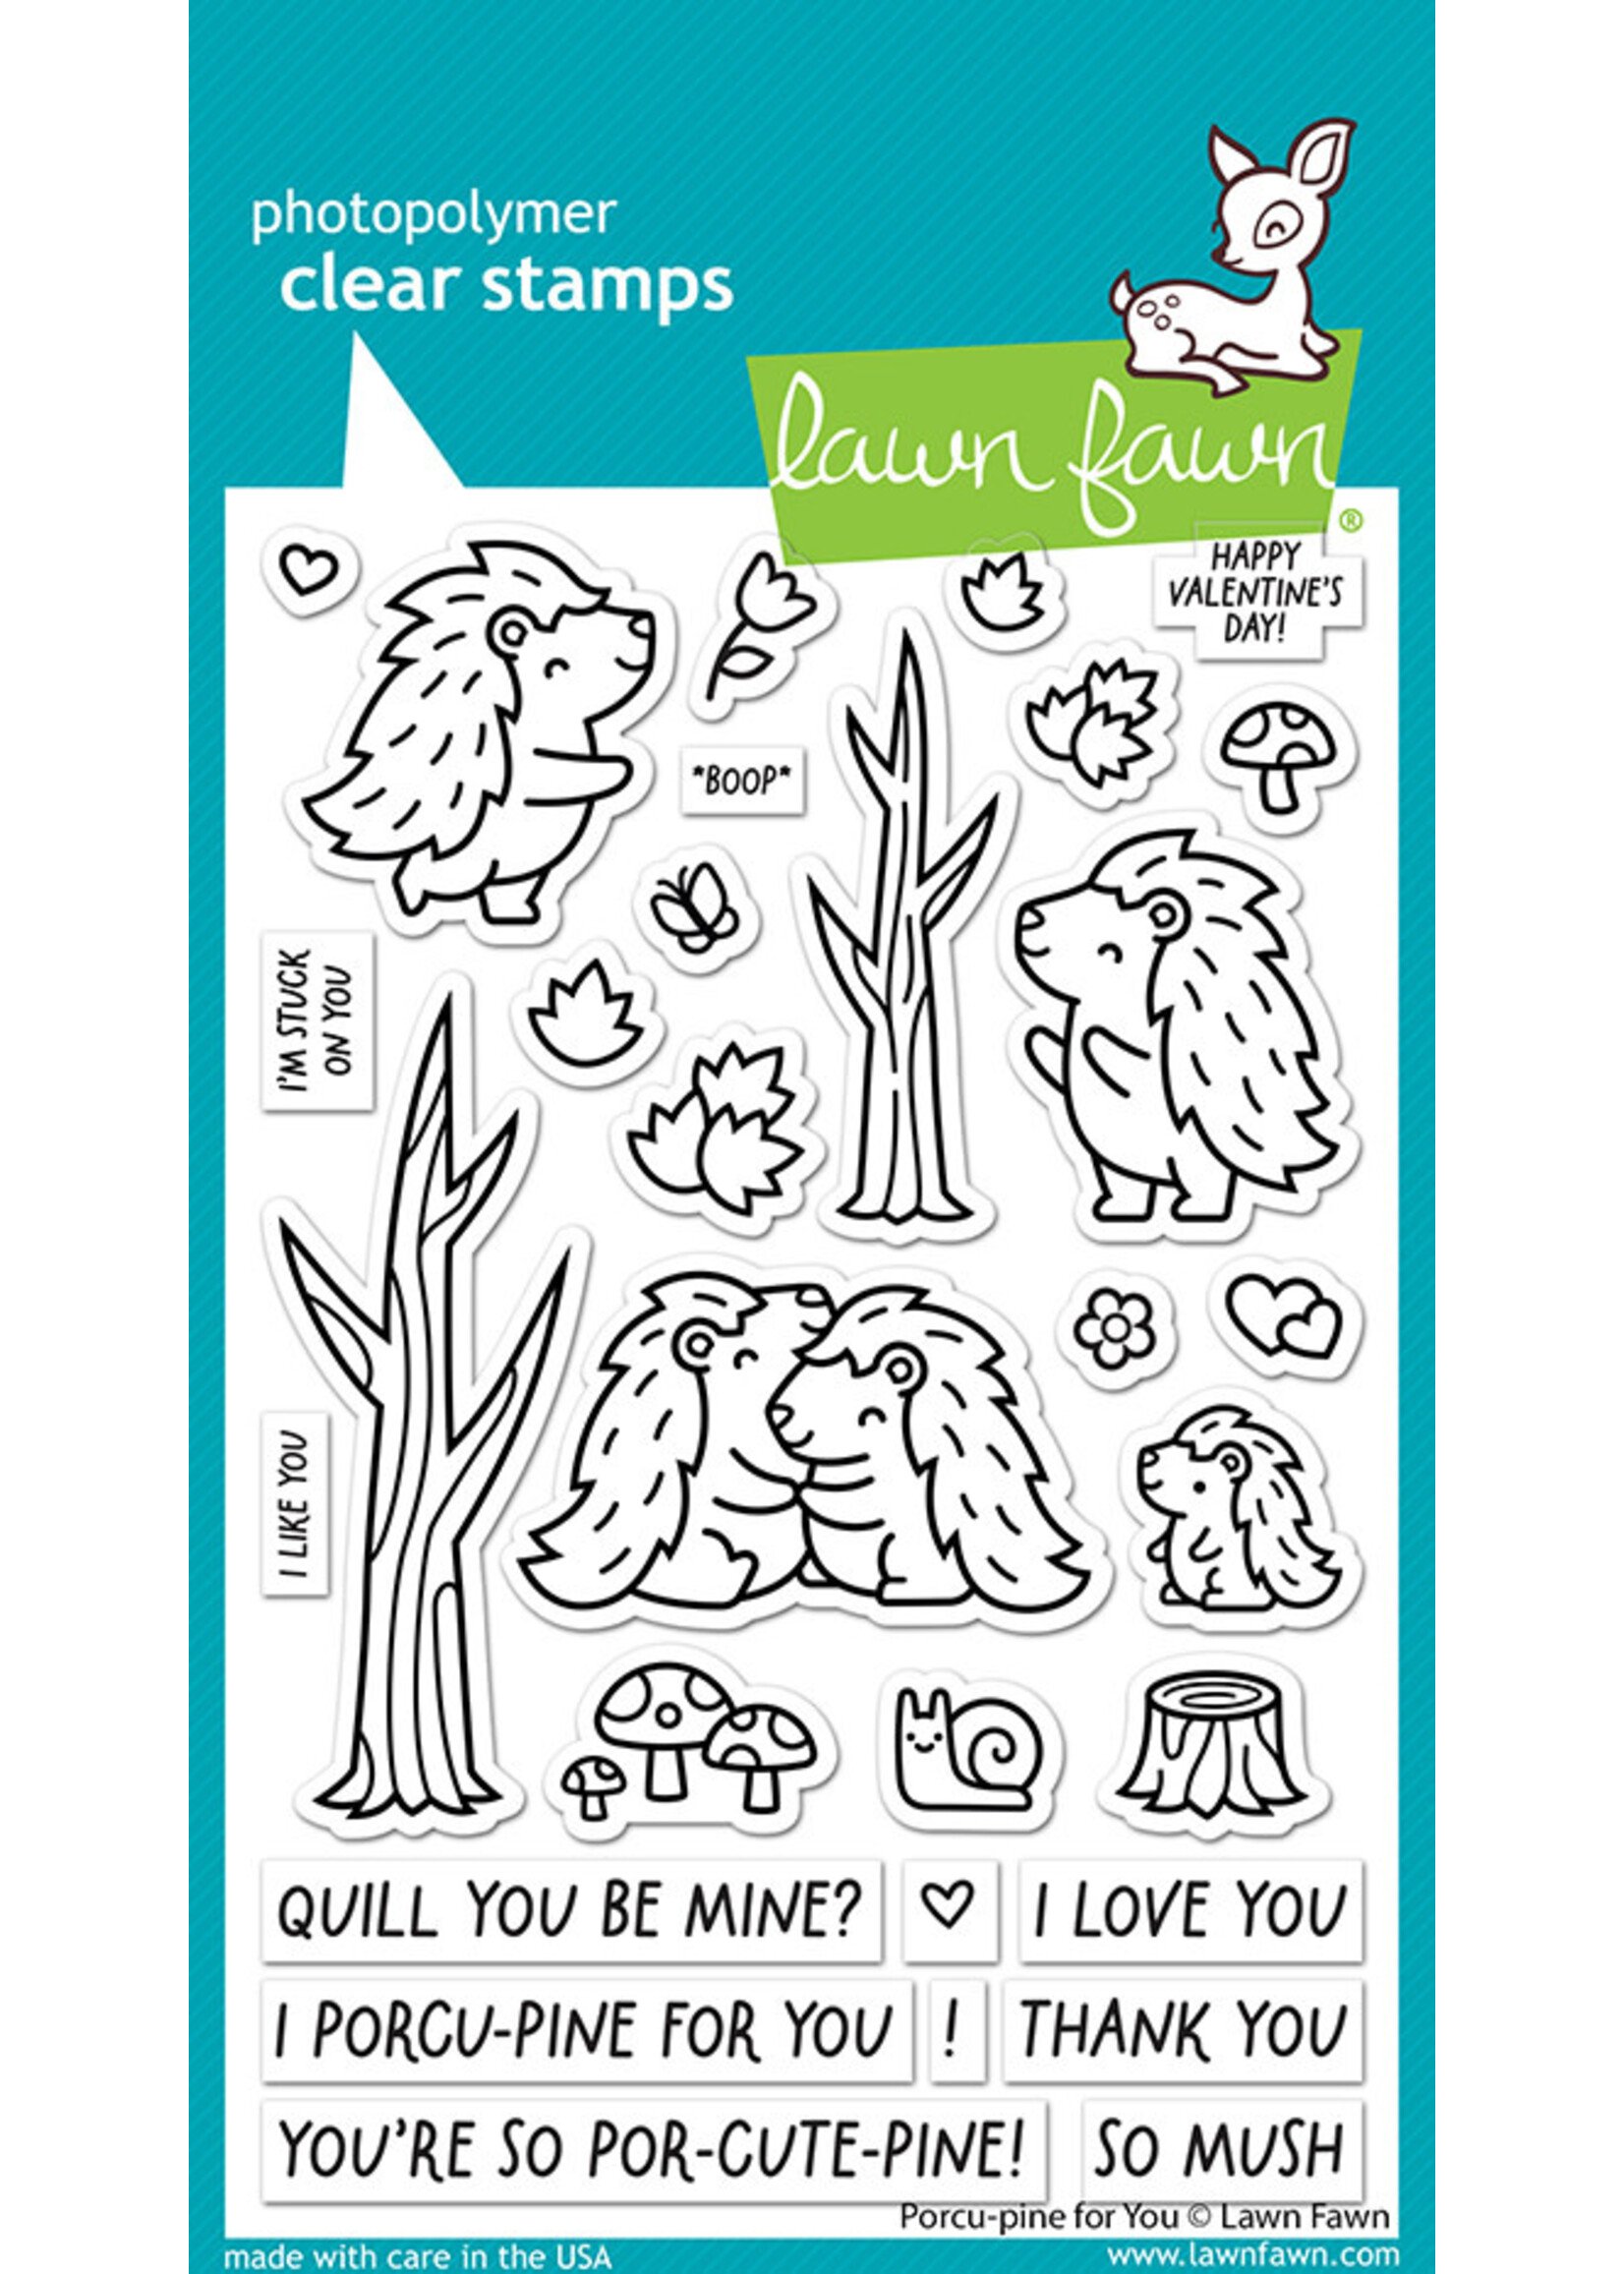 Lawn Fawn porcu-pine for you stamp